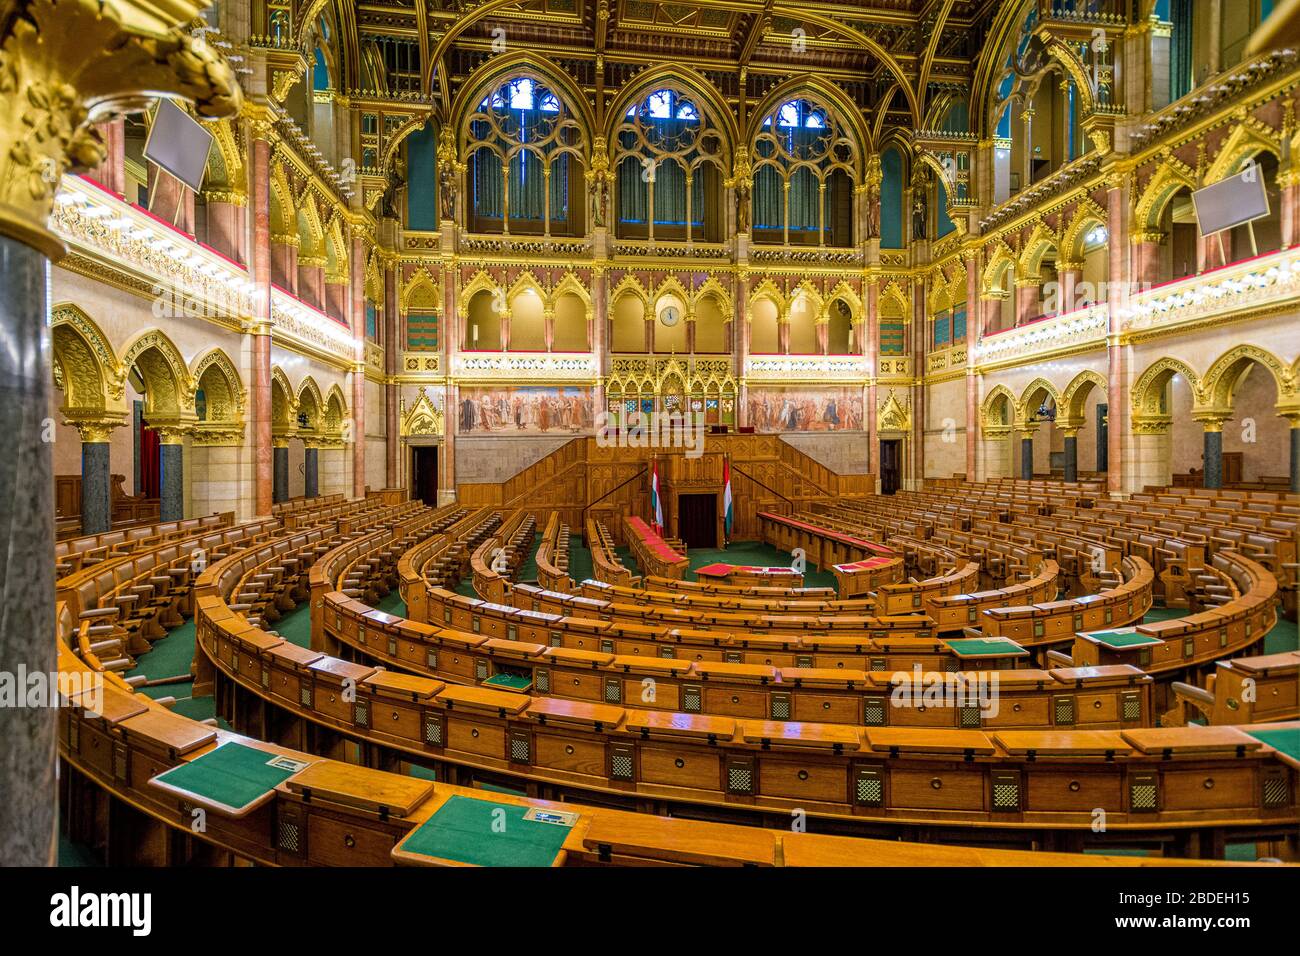 Interior sight in the marvellous Budapest Parliament, Hungary. Stock Photo